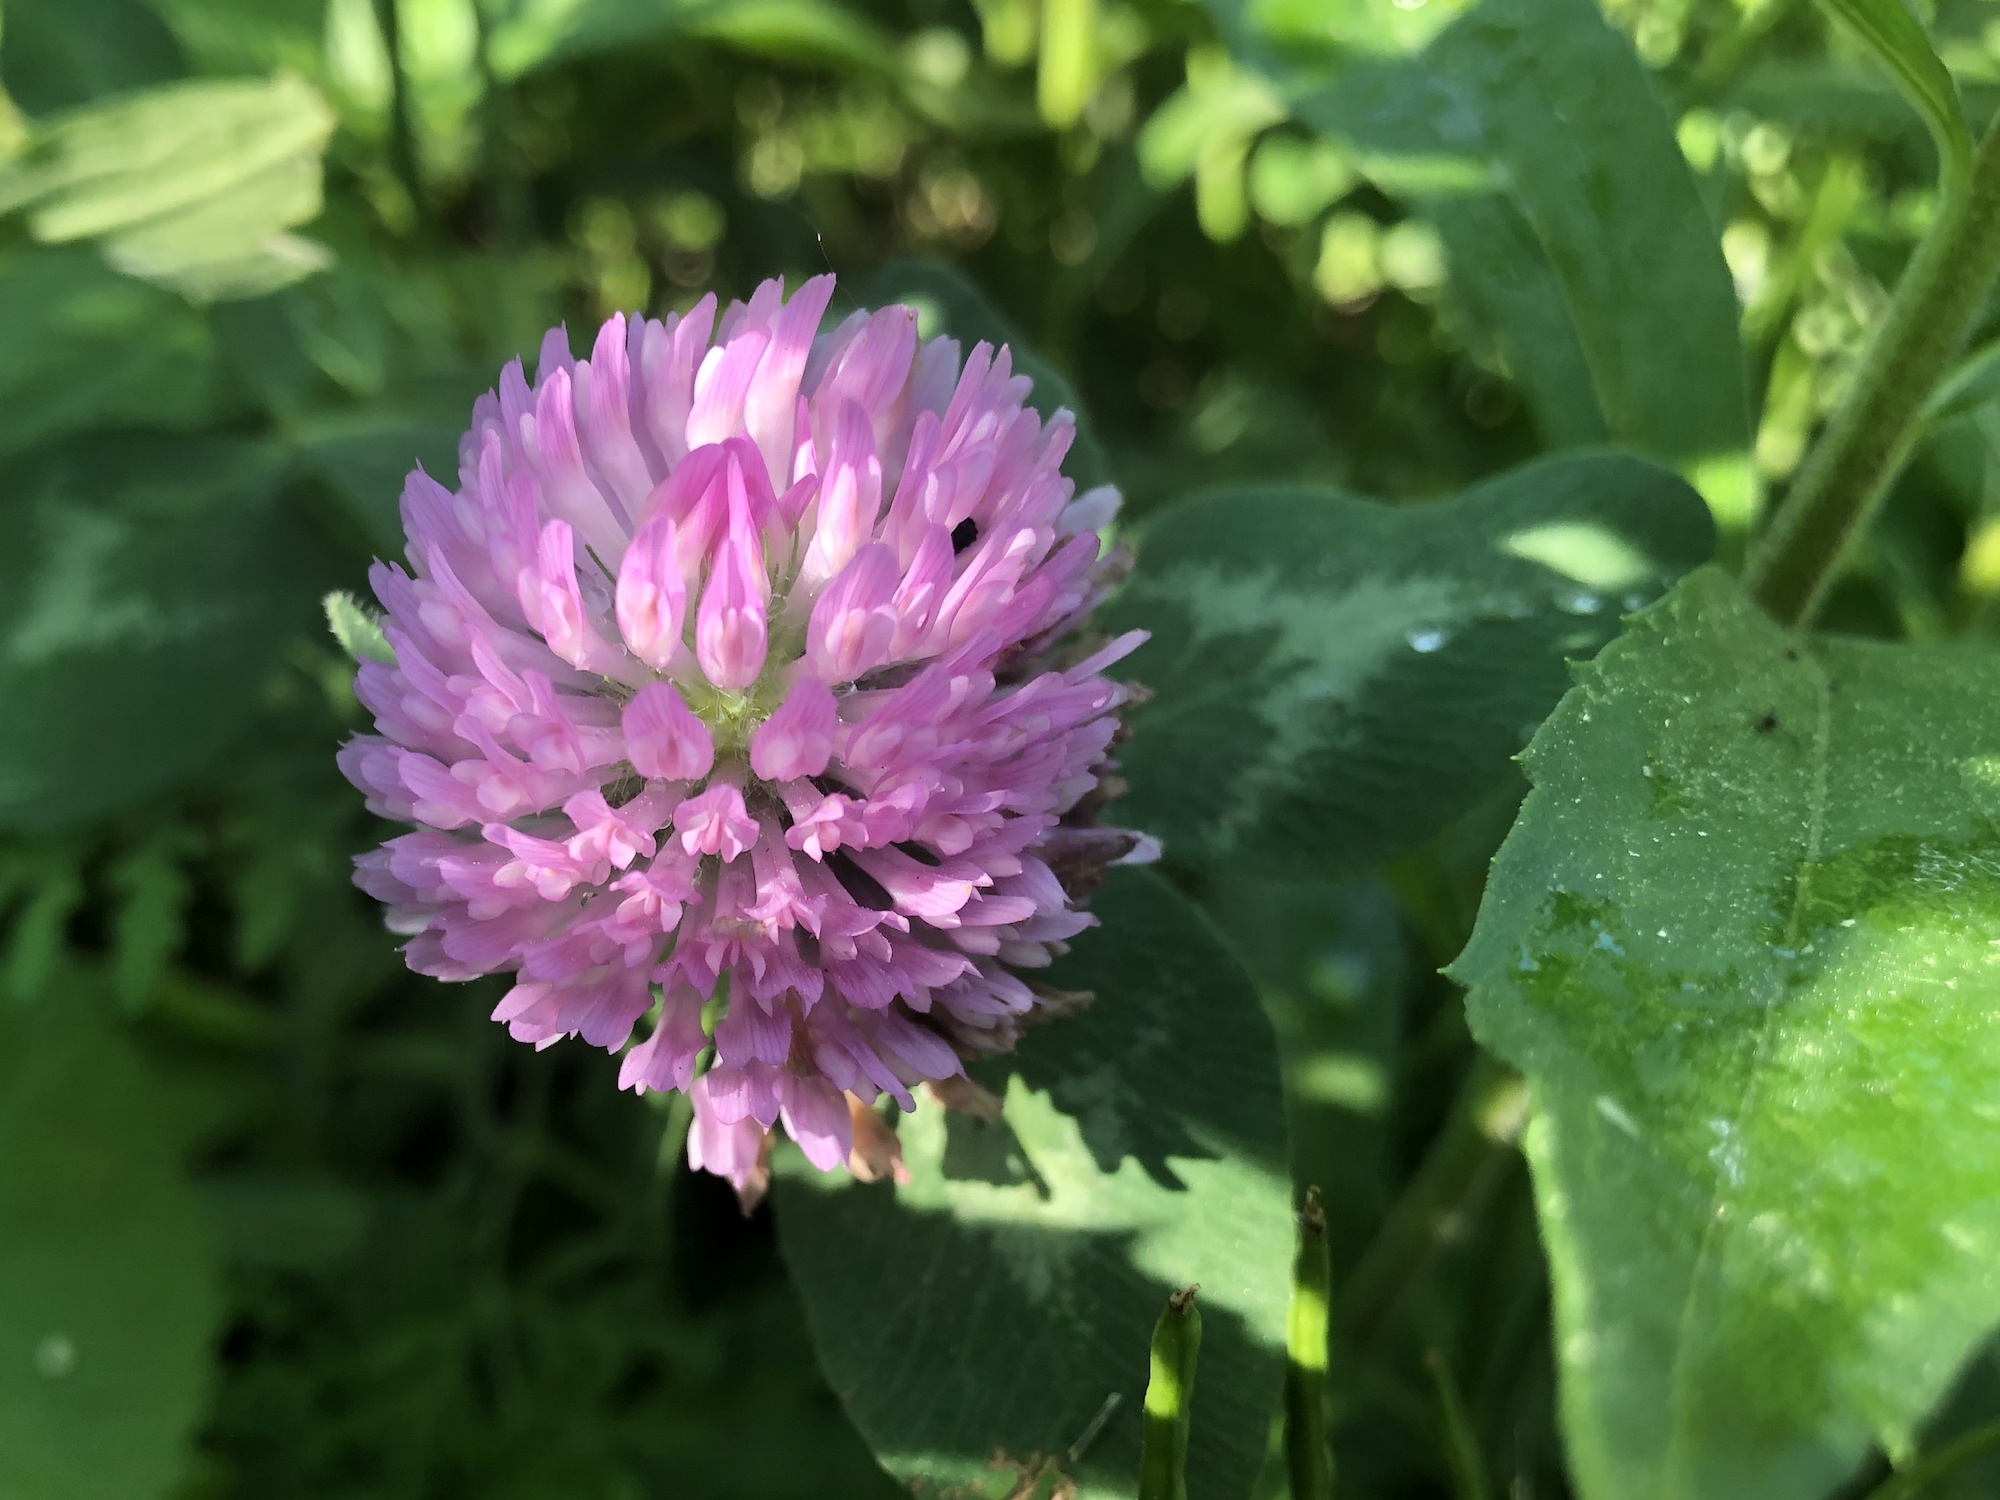 Red Clover on bank of retaining pond at the corner of Manitou Way and Nakoma Road in Madison, Wisconsin on June 4, 2020.